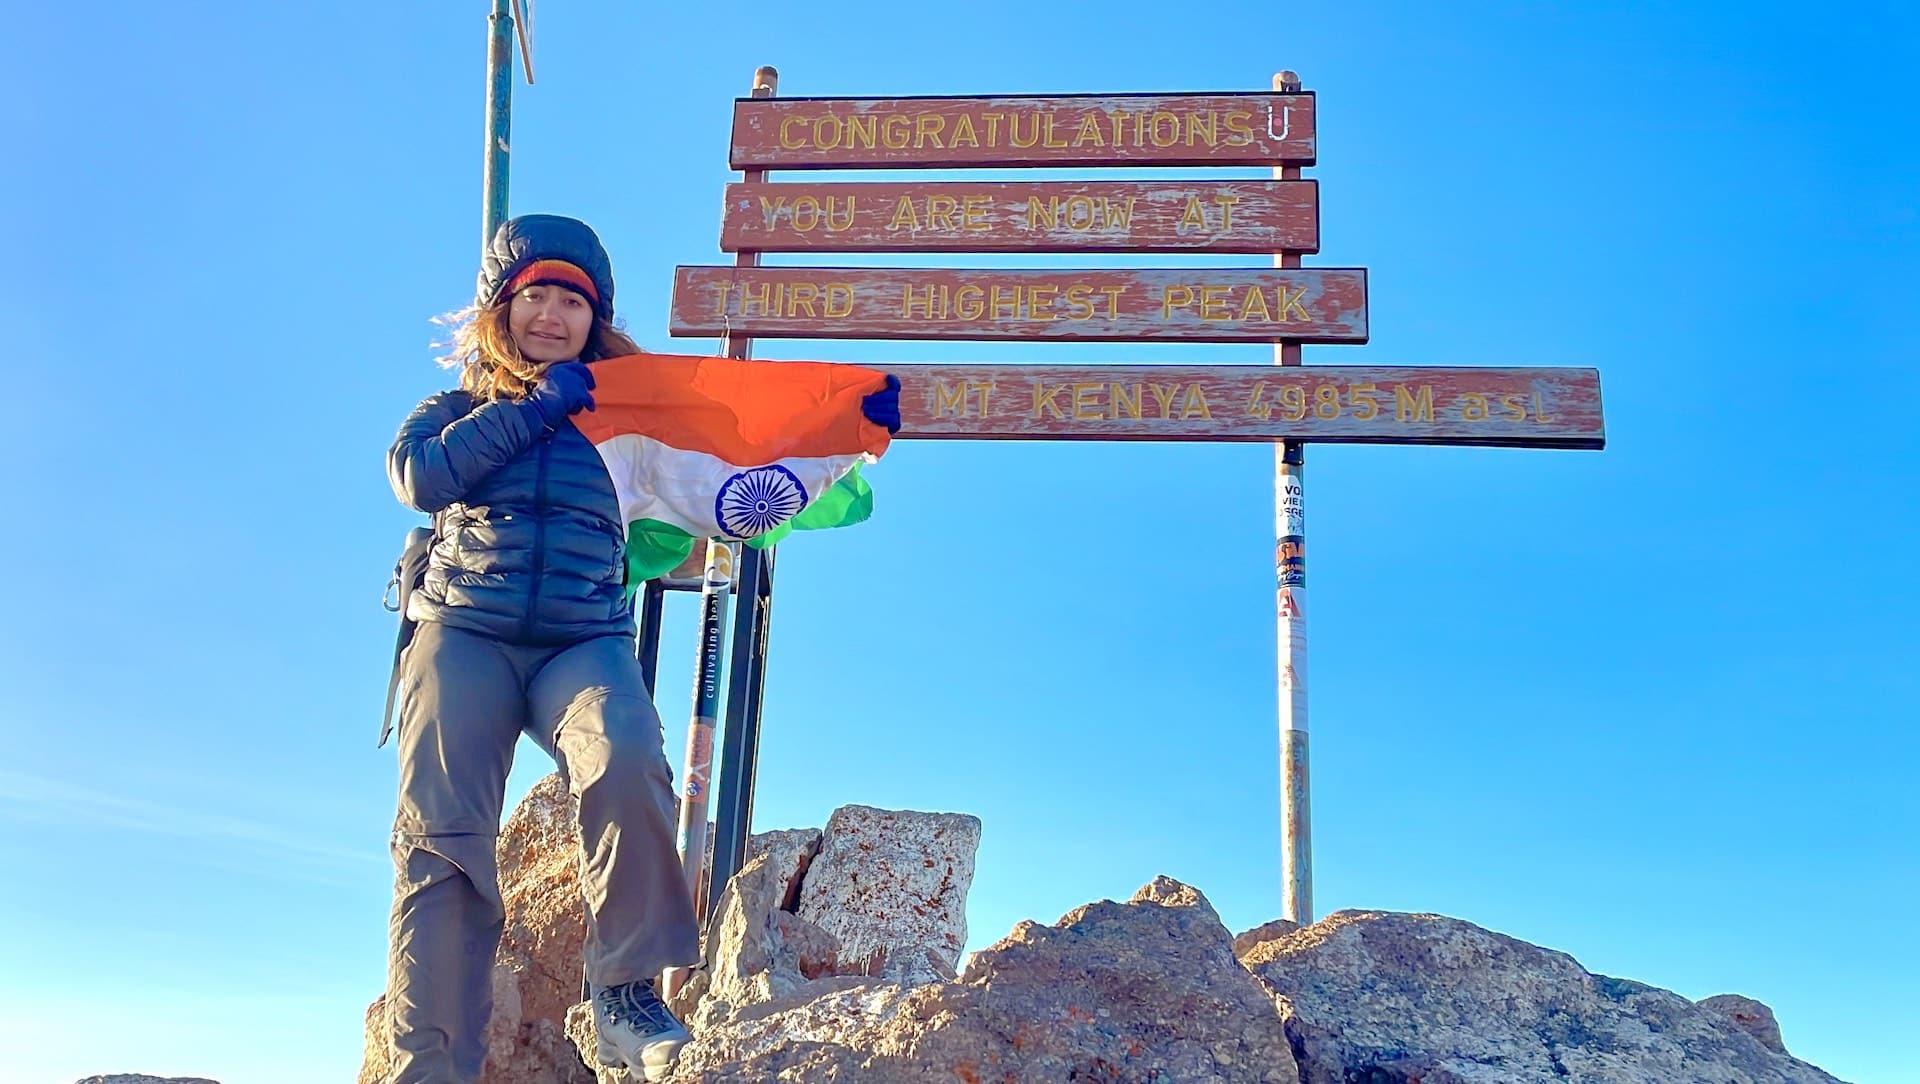 Indian Girl Climbs Top 3 Mountains of Africa, Aims To Climb 12 Mountains This Year